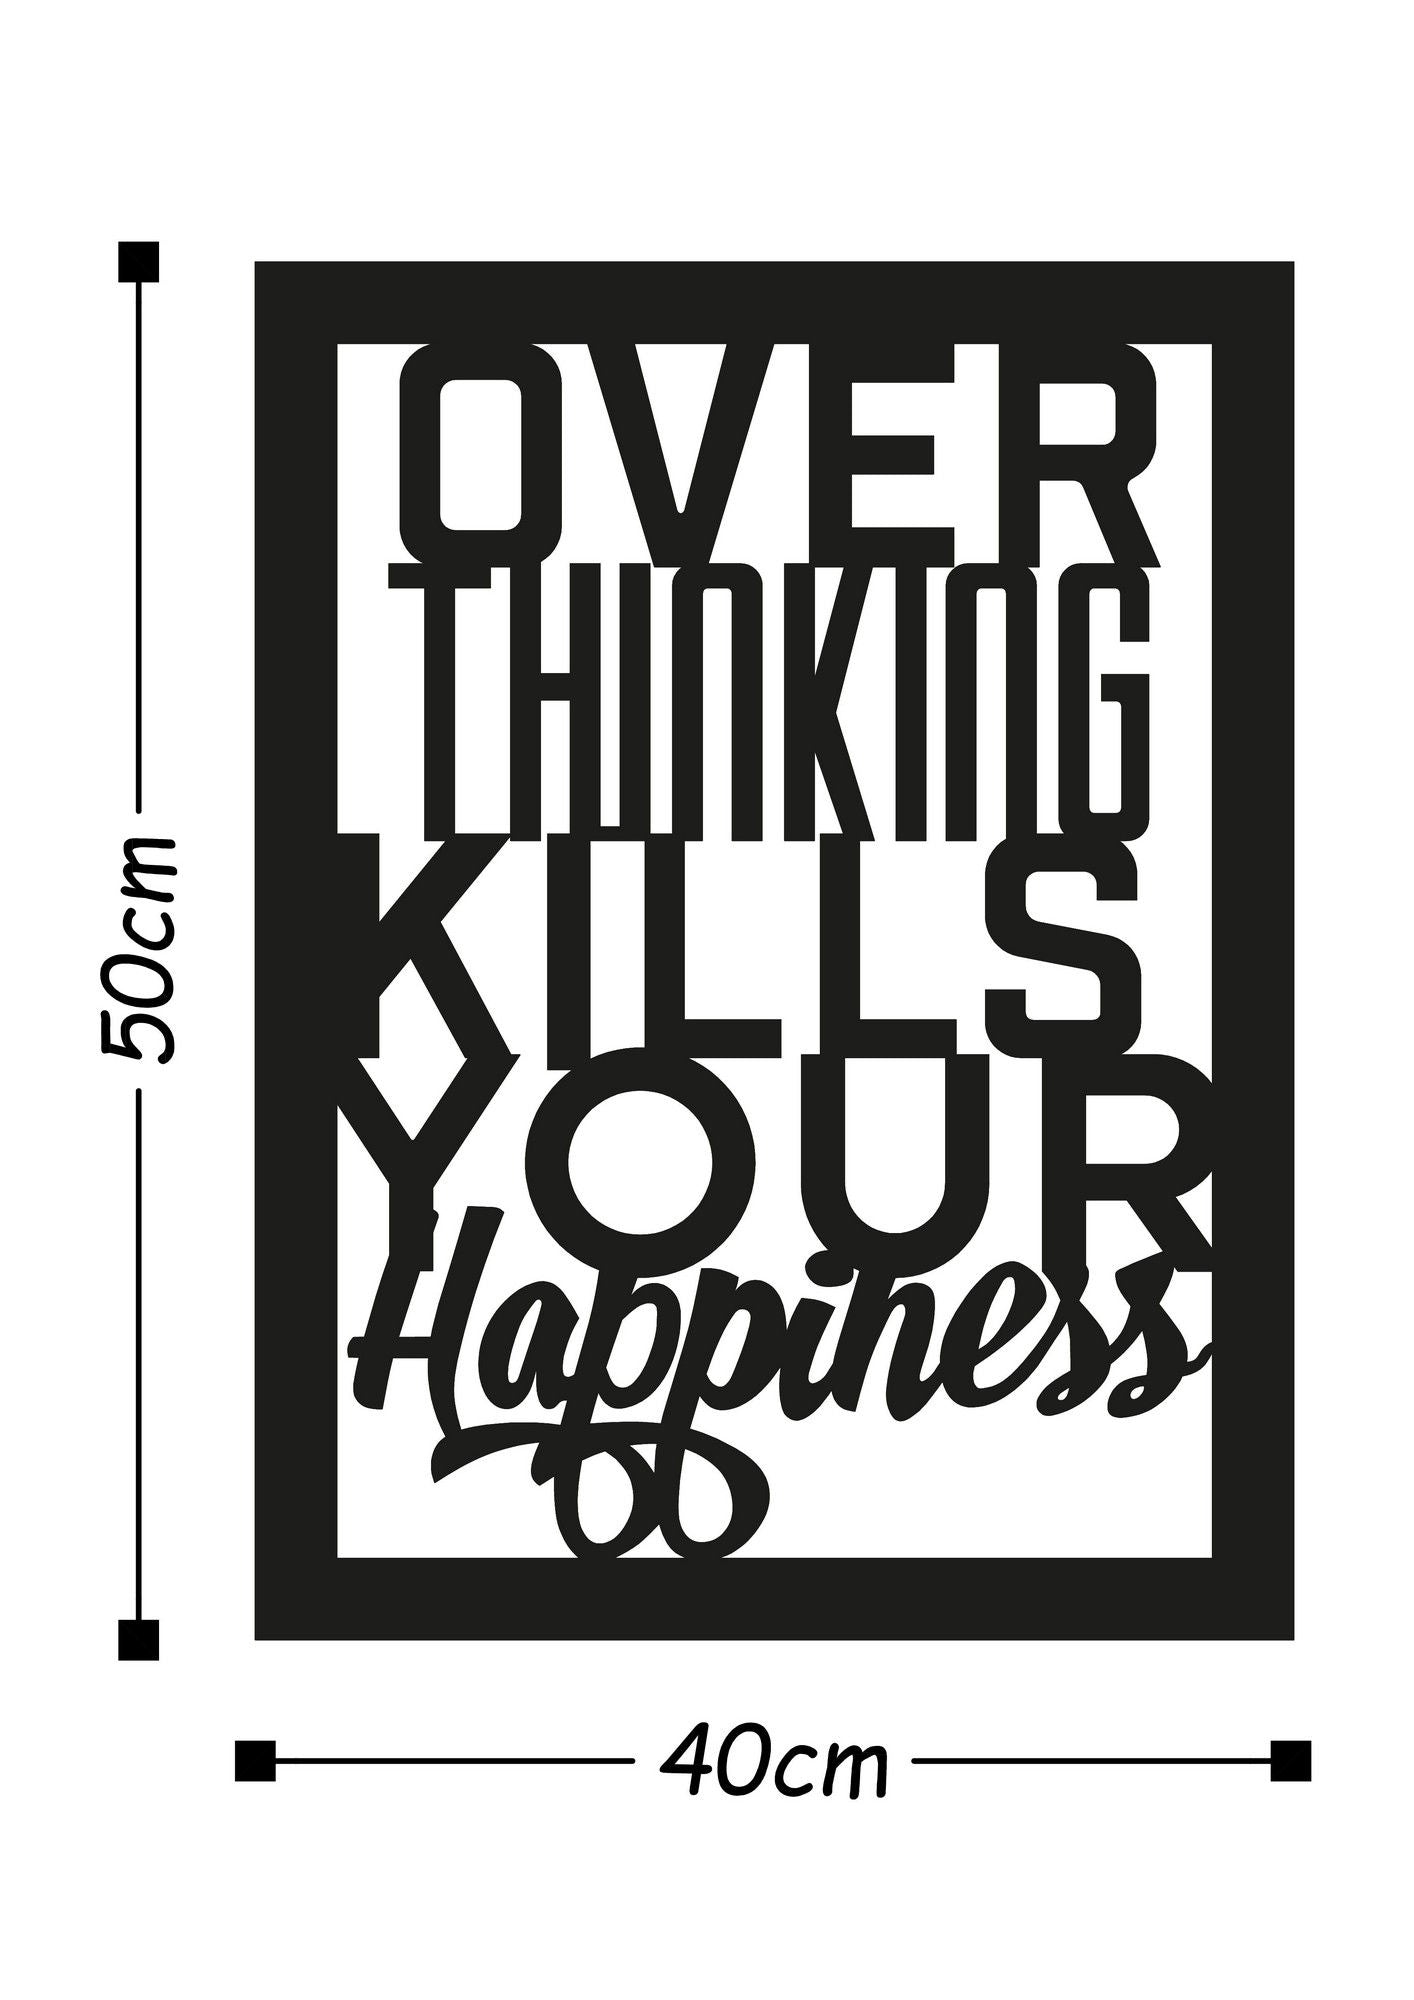 Over Thinking Kills Your Happiness - Decorative Metal Wall Accessory